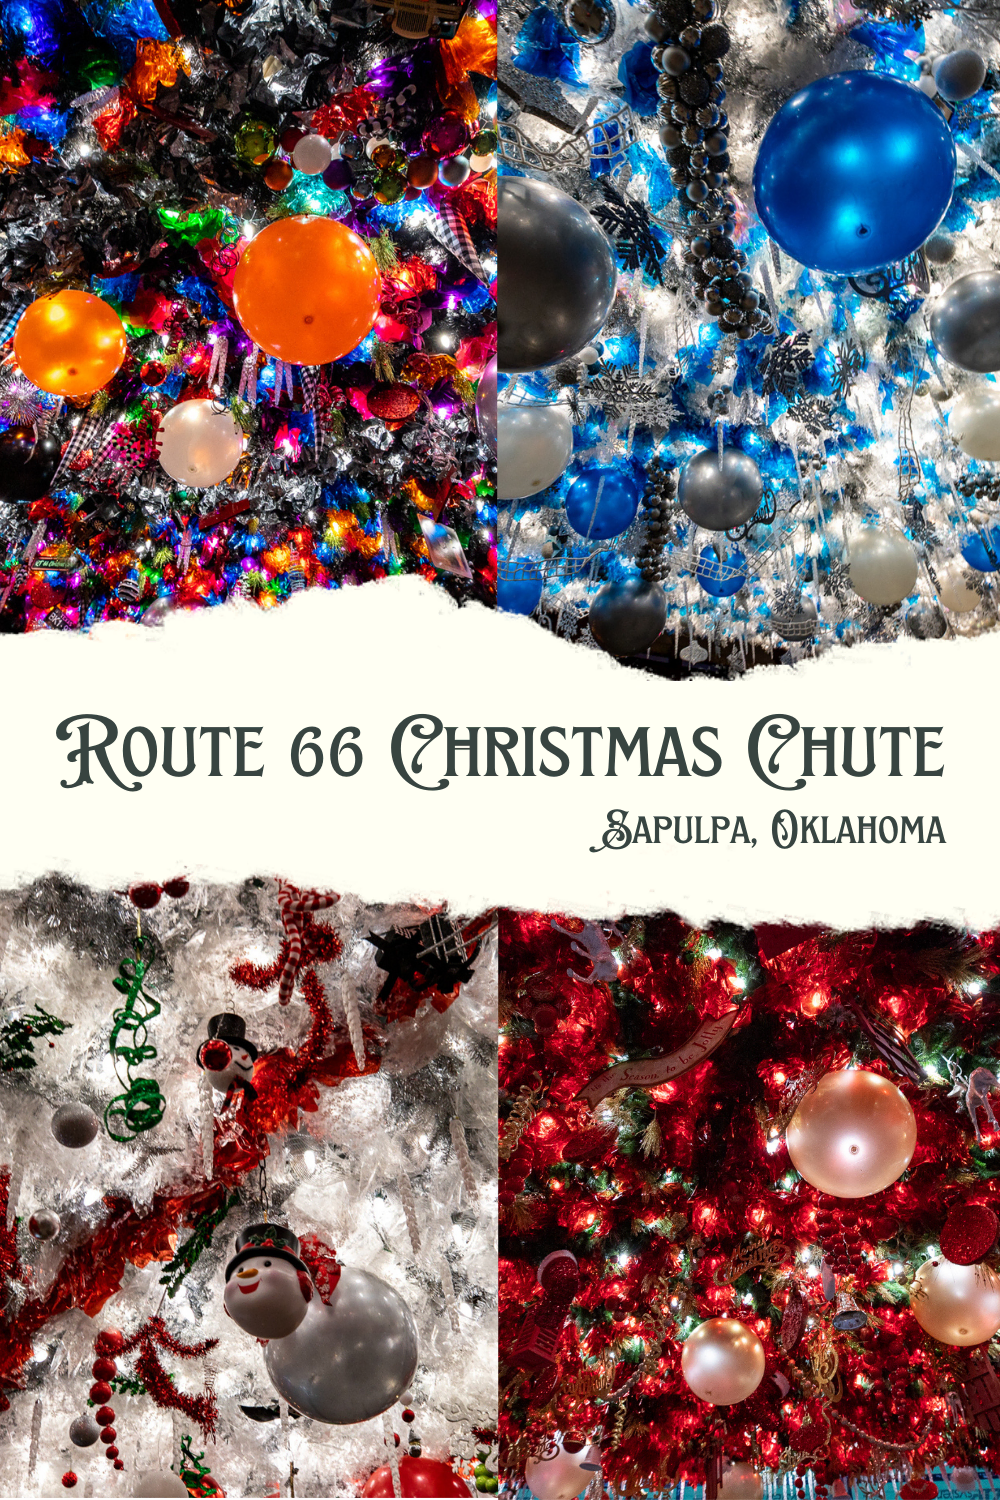 Celebrate the shining lights of the holidays and the bright lights of Route 66 at an event that brings it all together: the Route 66 Christmas Chute in Sapulpa, Oklahoma. View thousands of lights and holiday decorations arranged as canopies on this stretch of the Mother Road. Perfect stop for a winter Route 66 road trip! #Route66 #RoadTrip